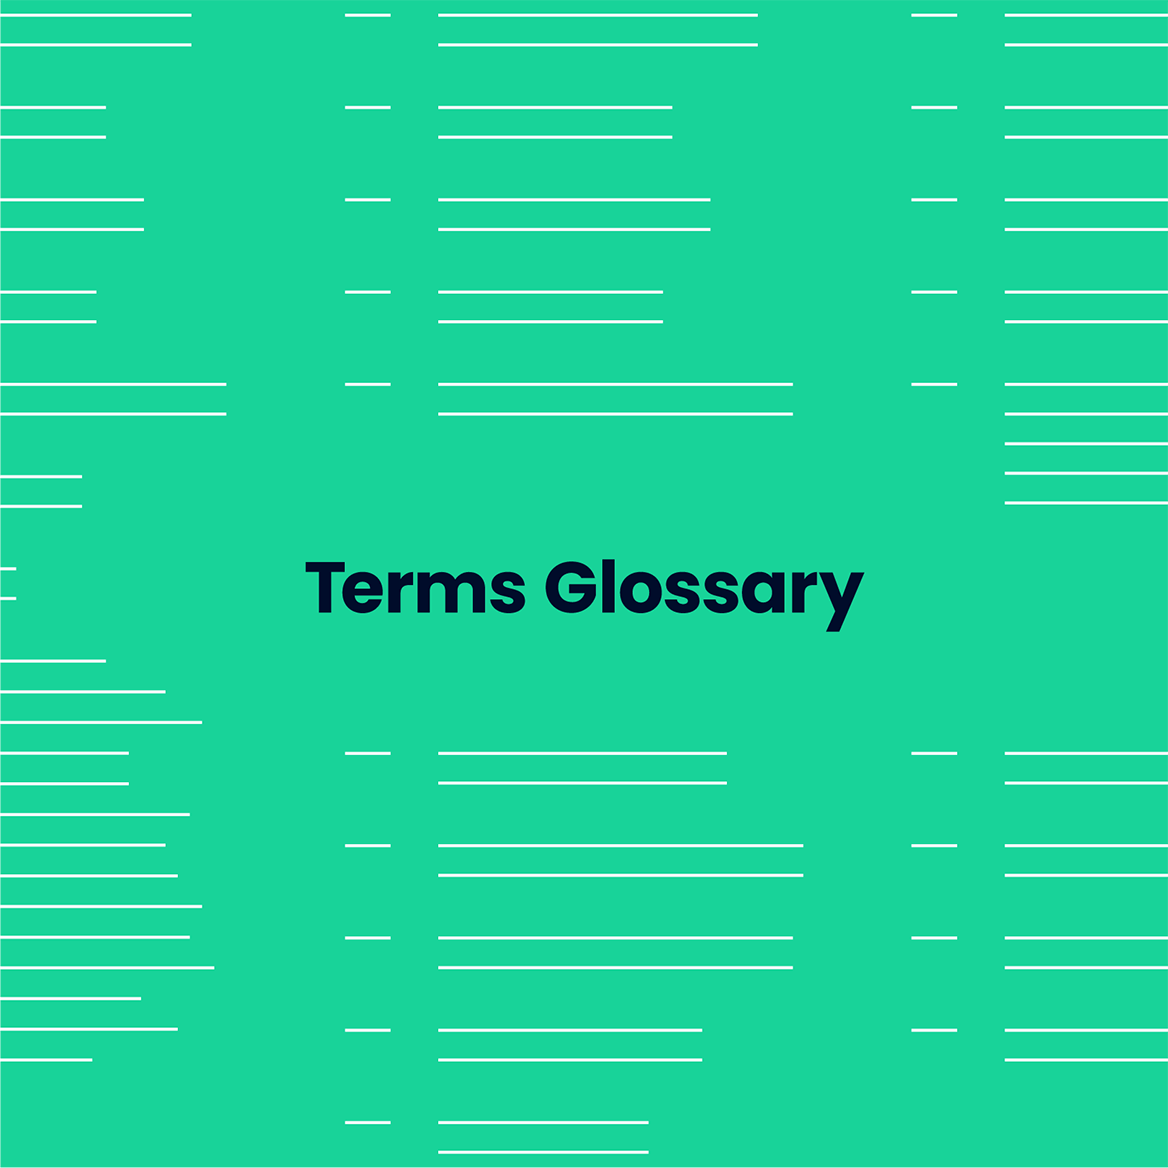 Templates-Terms Glossary